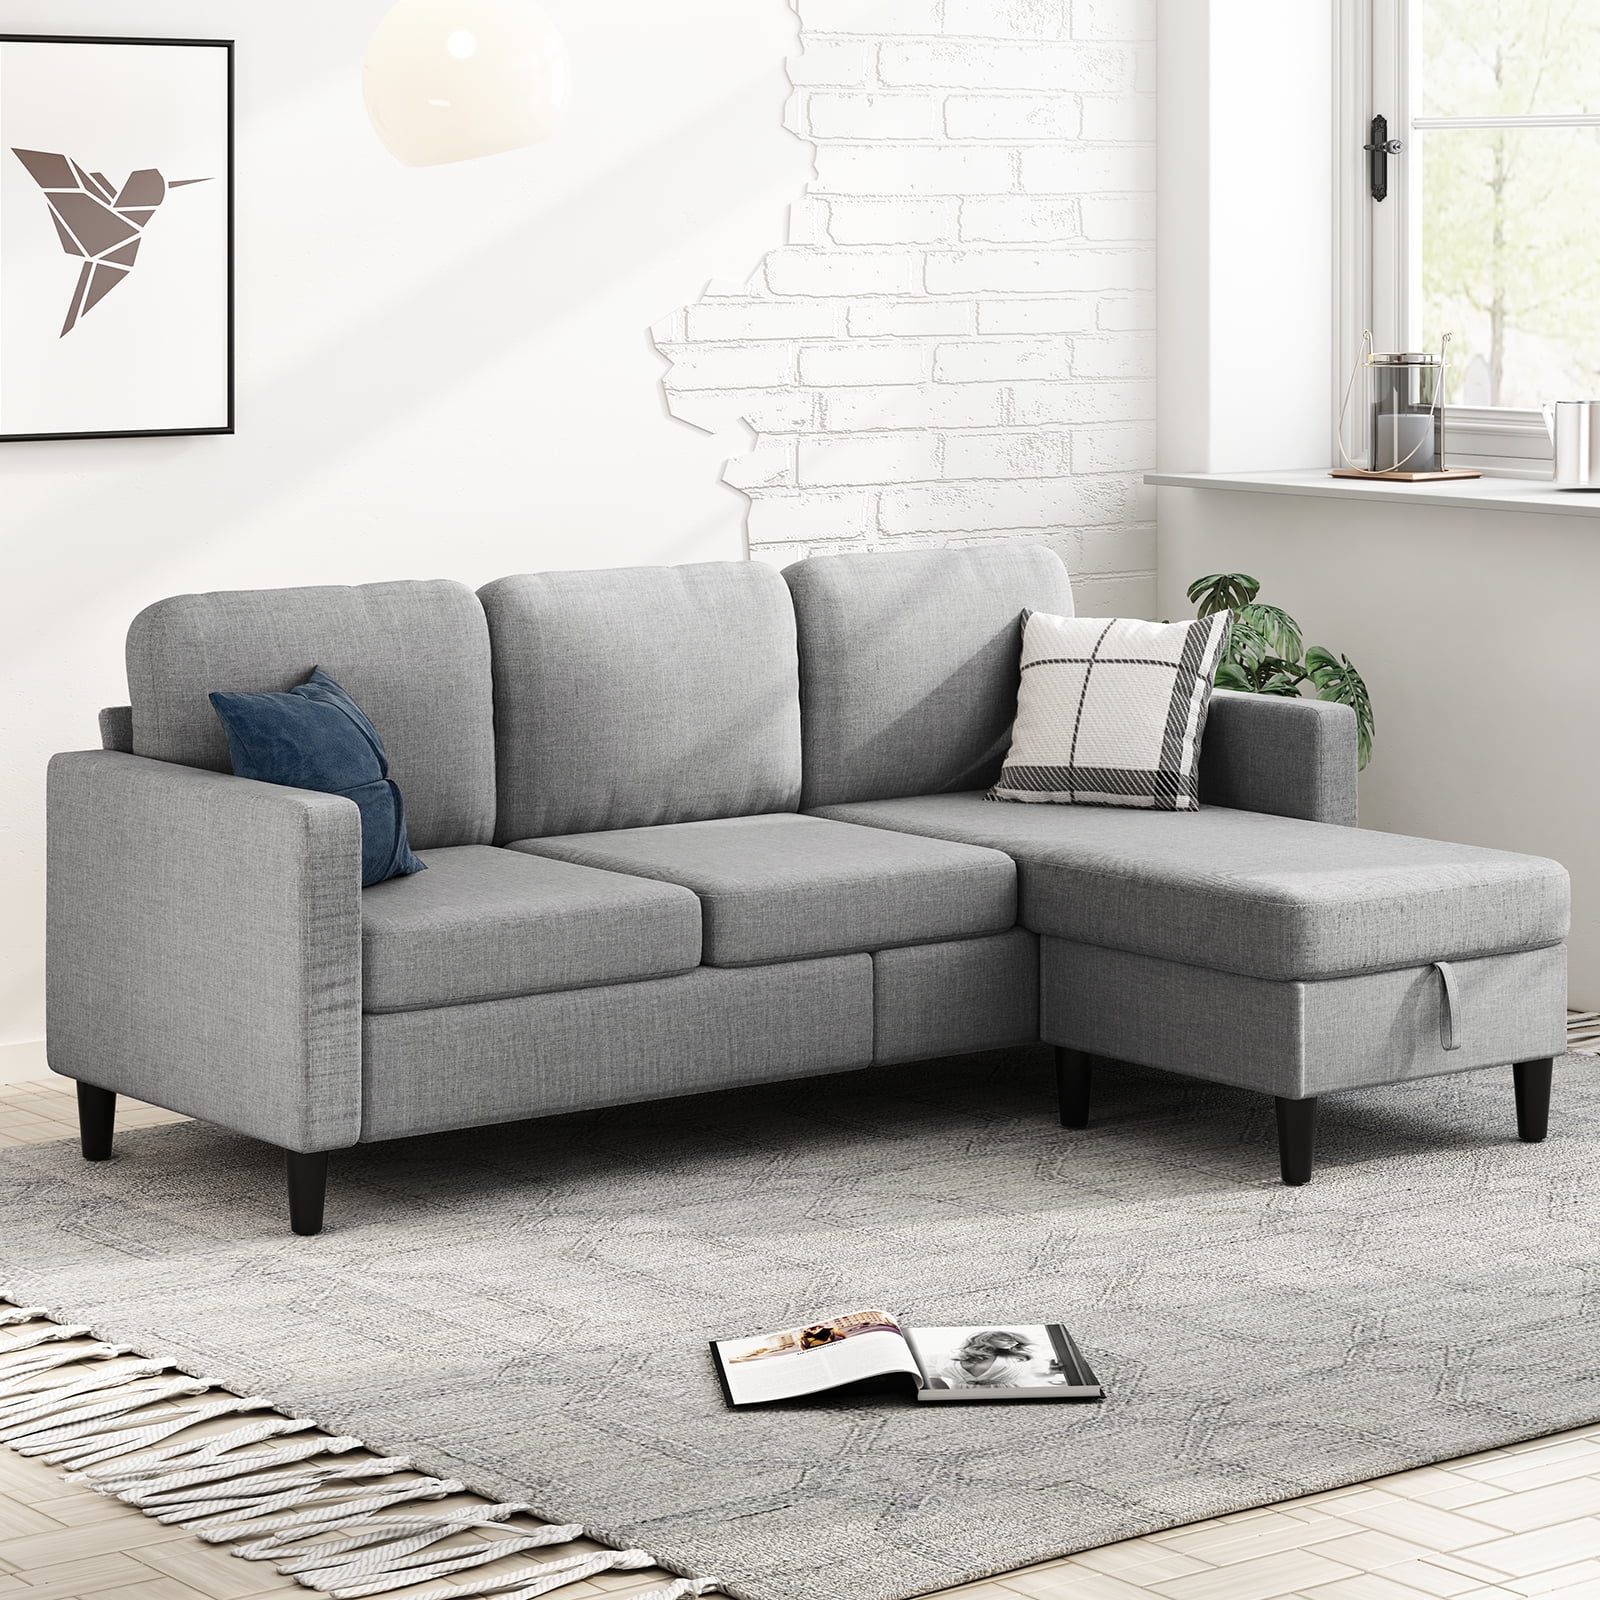 MUZZ Sectional Sofa with Movable Ottoman, Free Combination Sectional Couch, Small L Shaped Sectional Sofa with Storage Ottoman, Modern Linen Fabric Sofa Set for Living Room (Light Grey)